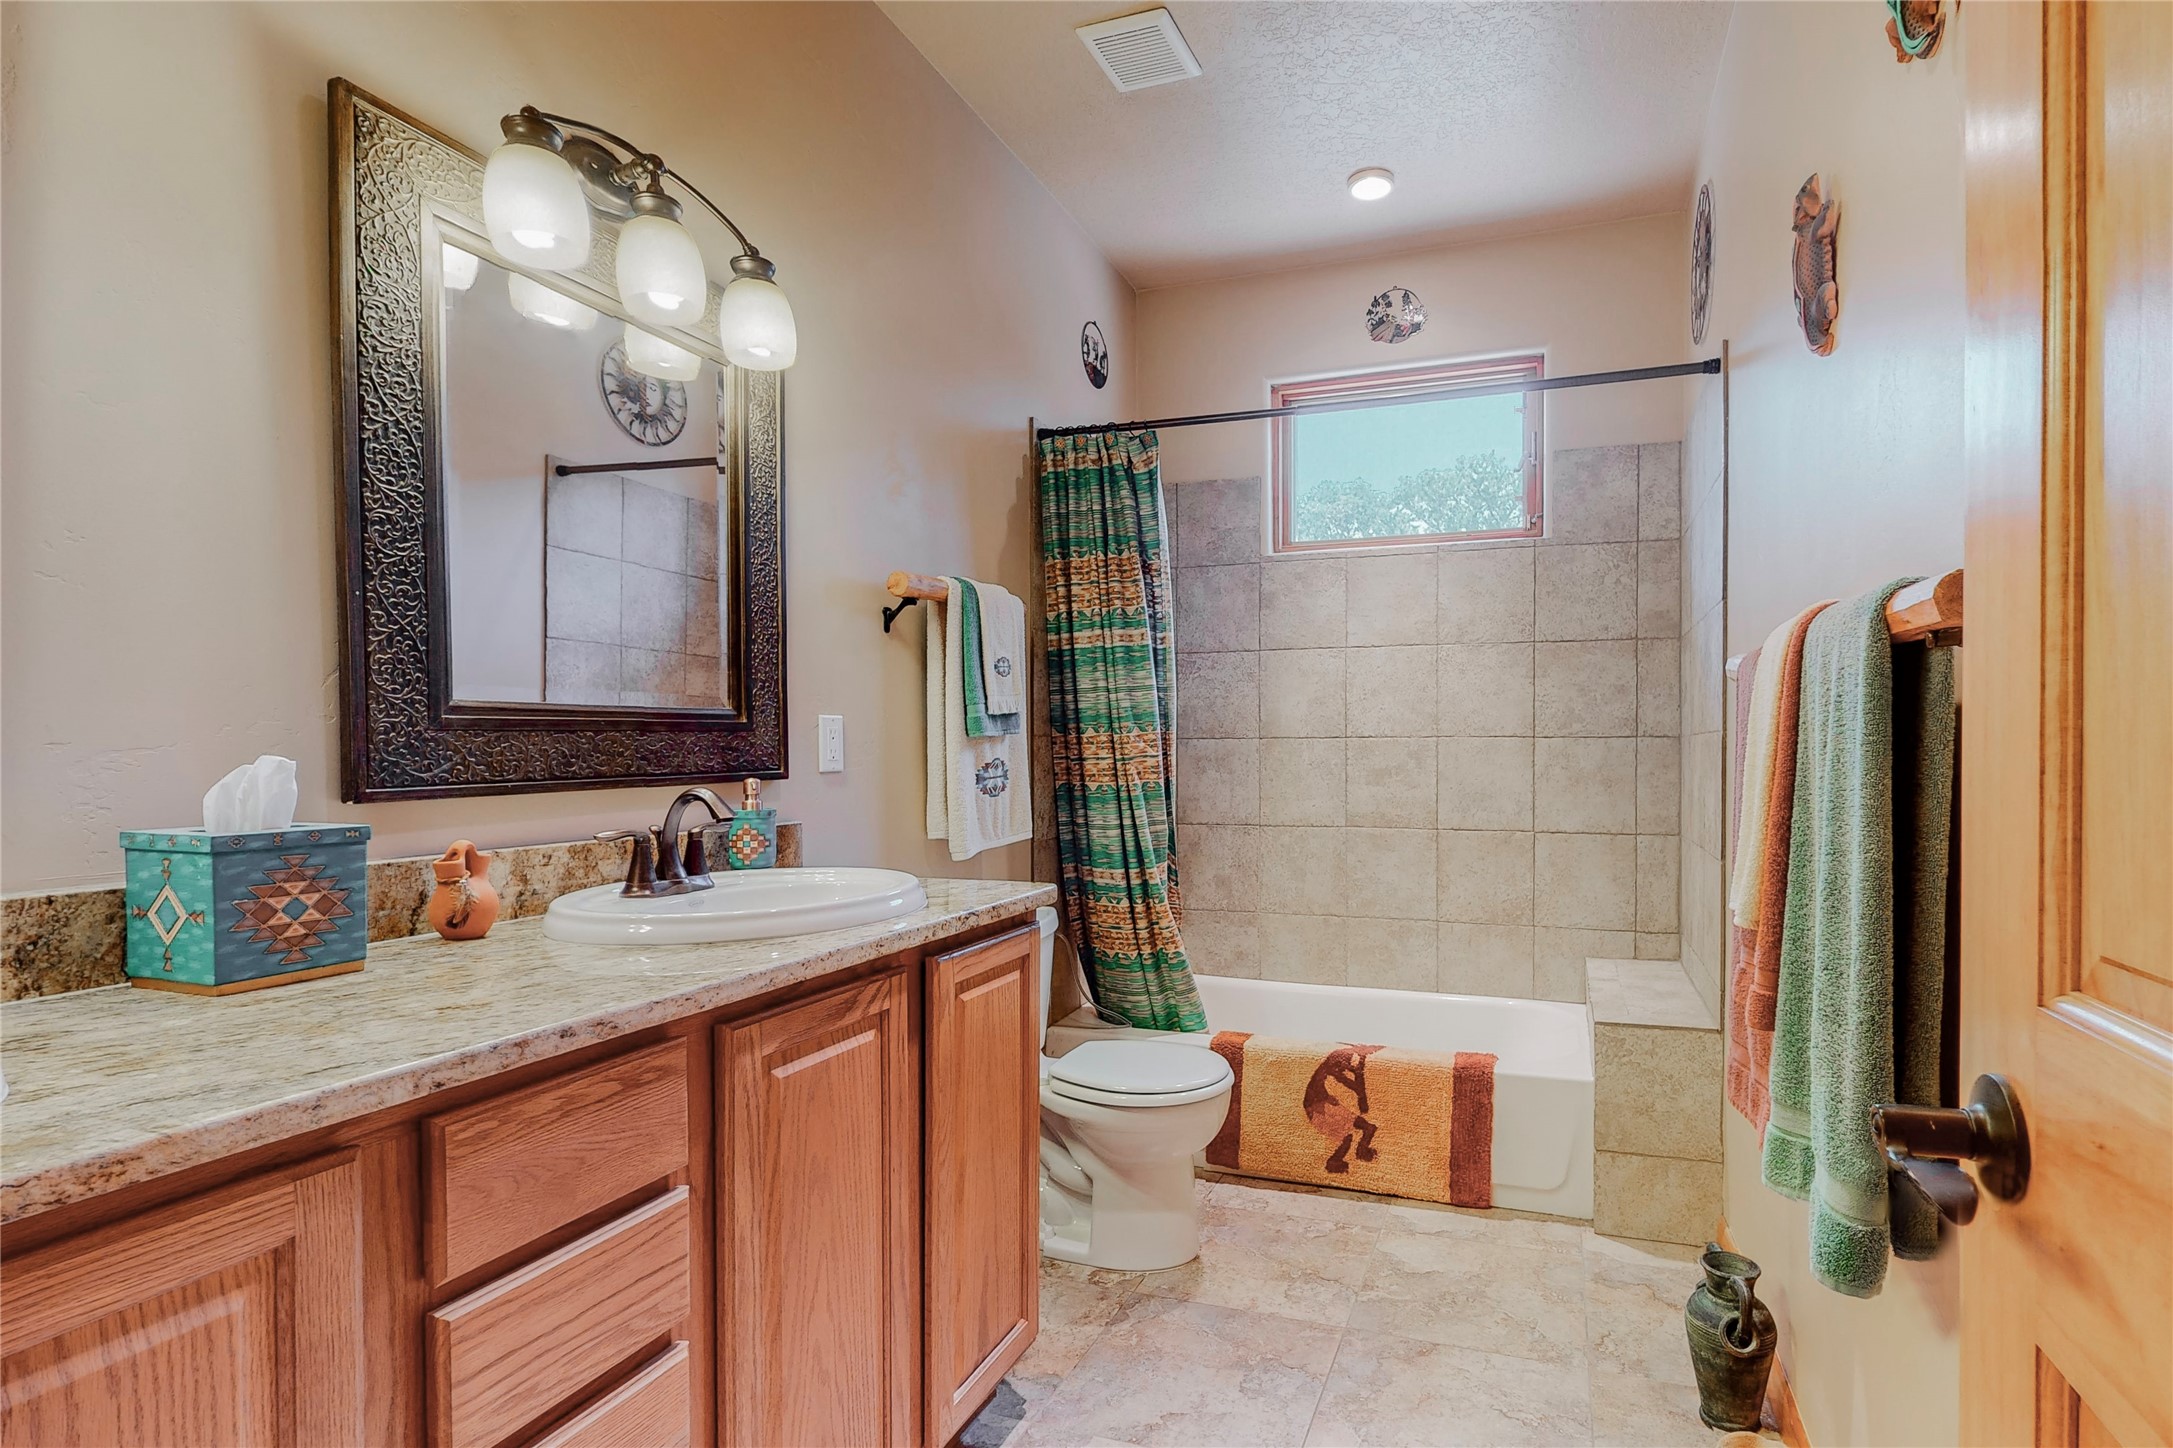 58 Express Boulevard, Sandia Park, New Mexico 87047, 4 Bedrooms Bedrooms, ,3 BathroomsBathrooms,Residential,For Sale,58 Express Boulevard,202233131